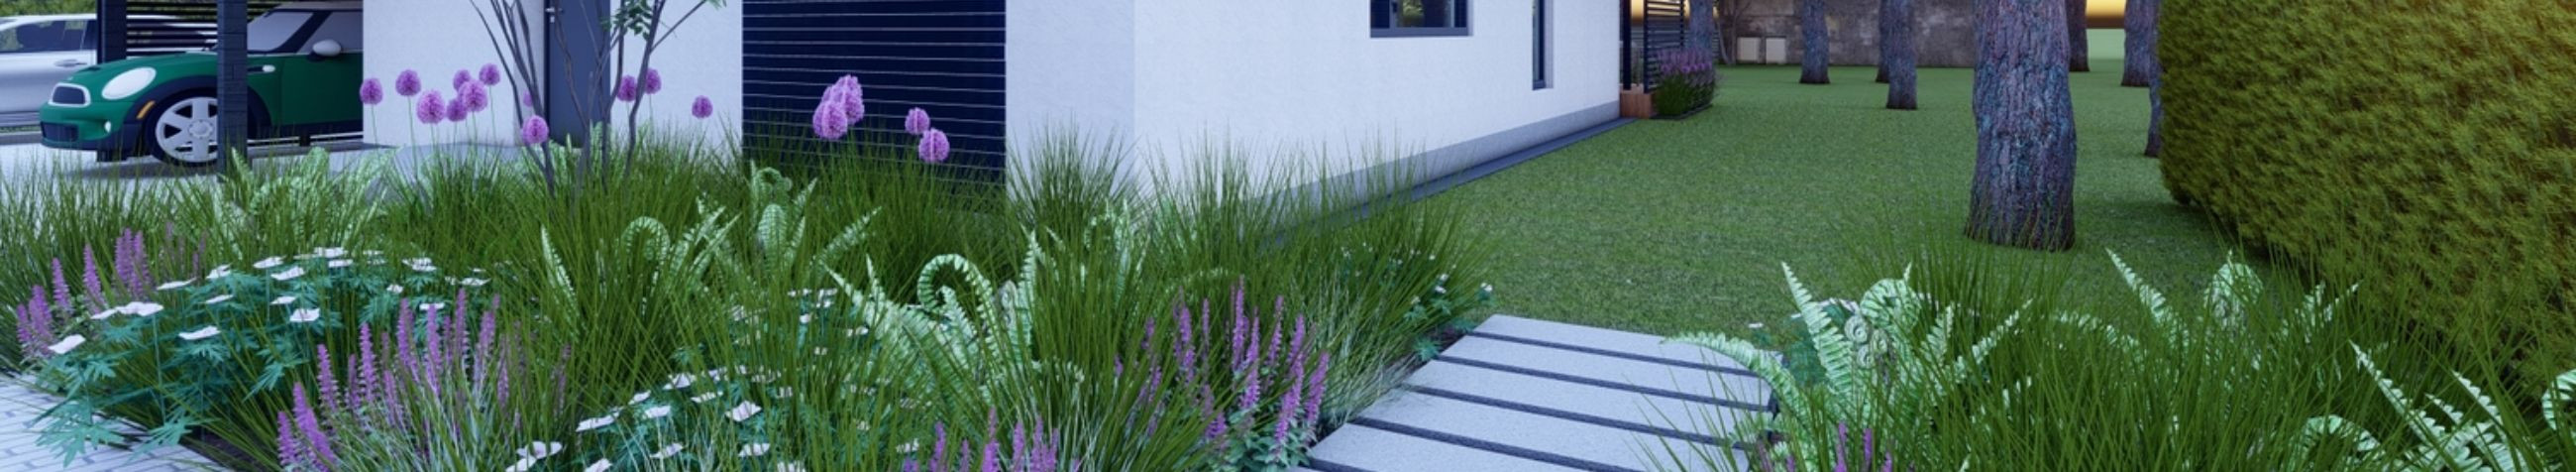 We offer comprehensive landscaping services from initial concept to complete garden transformation.